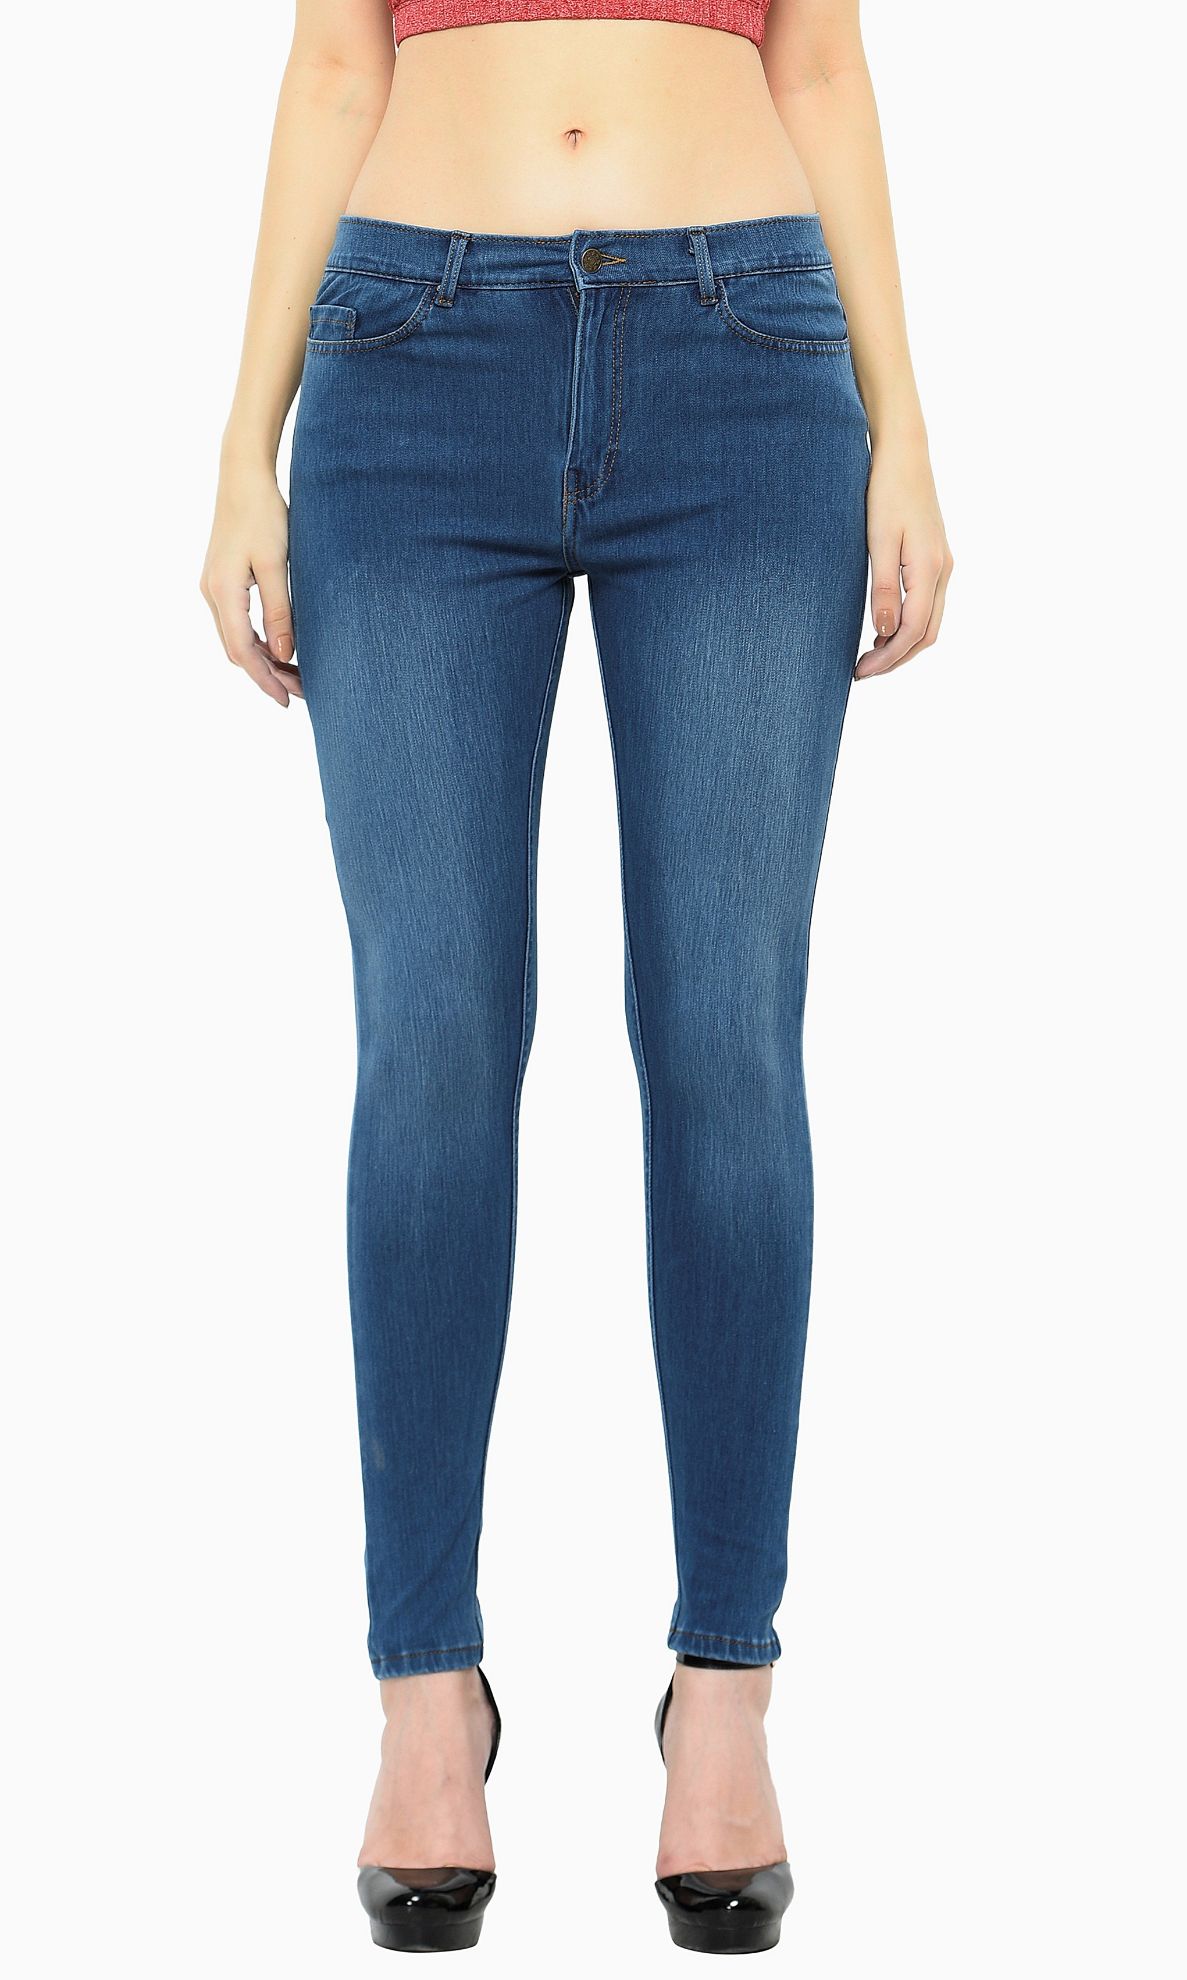 Frenchtrendz | Buy Frenchtrendz Cotton Viscose Spandex Blue Jeans Online